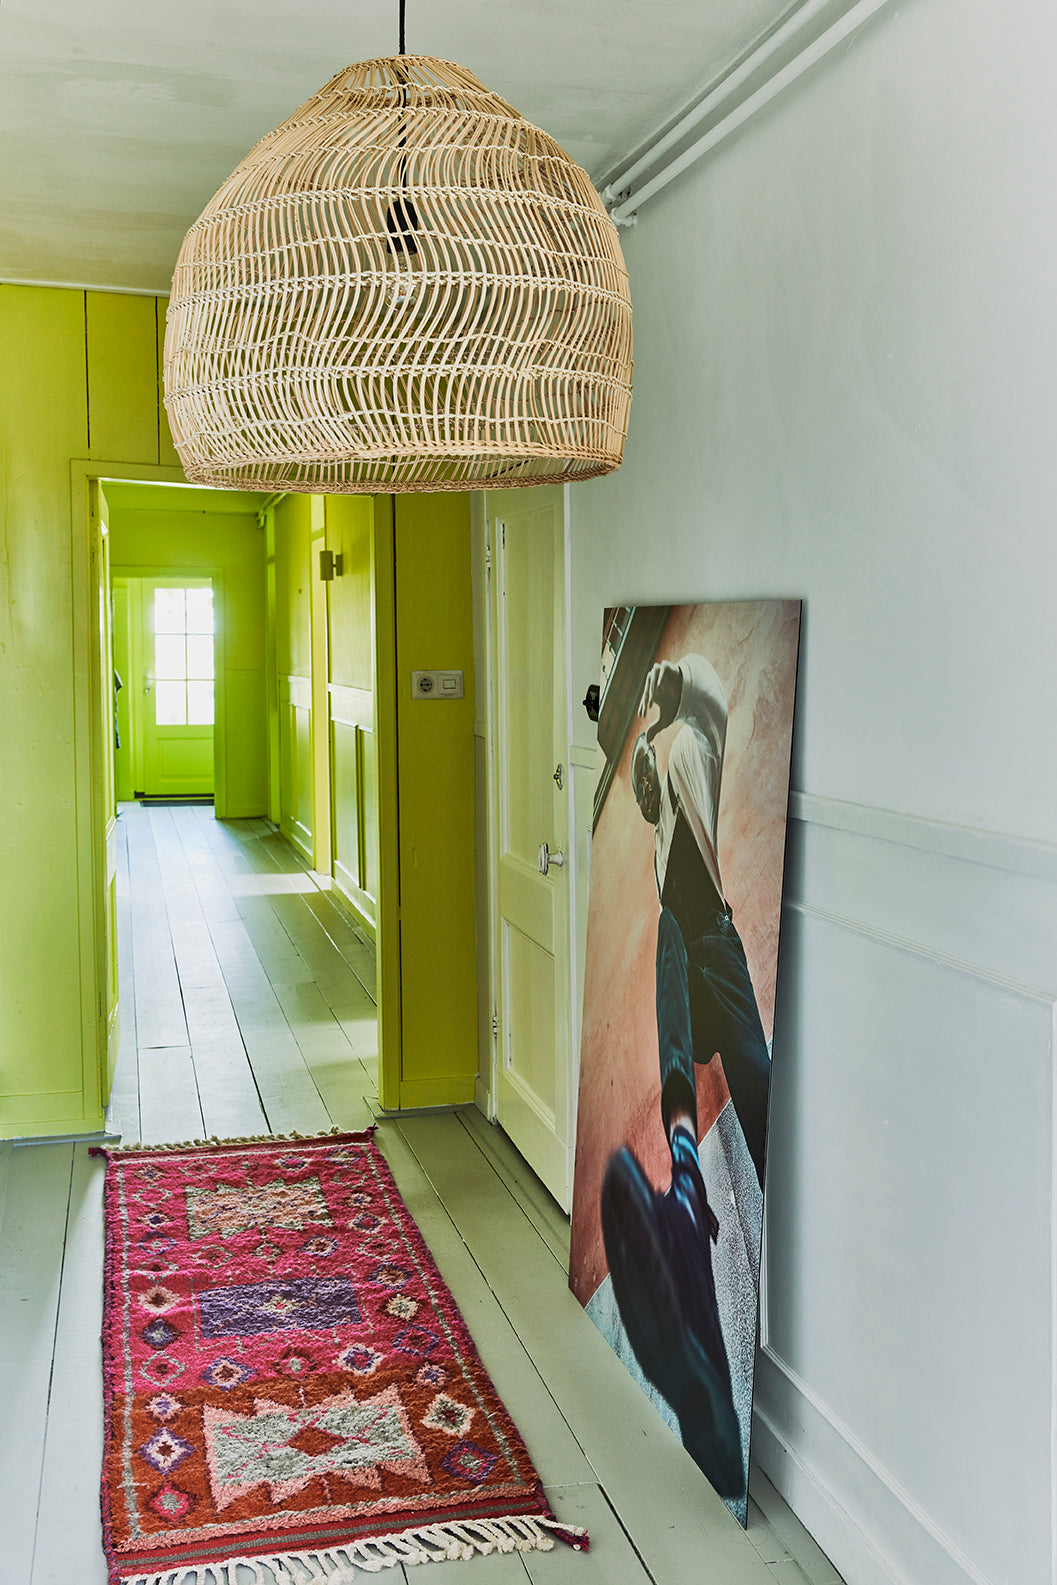 hallway with bright yellow walls, a natural wicker pendant light fixture and a bright pink woolen runner with purple red and gray patterns